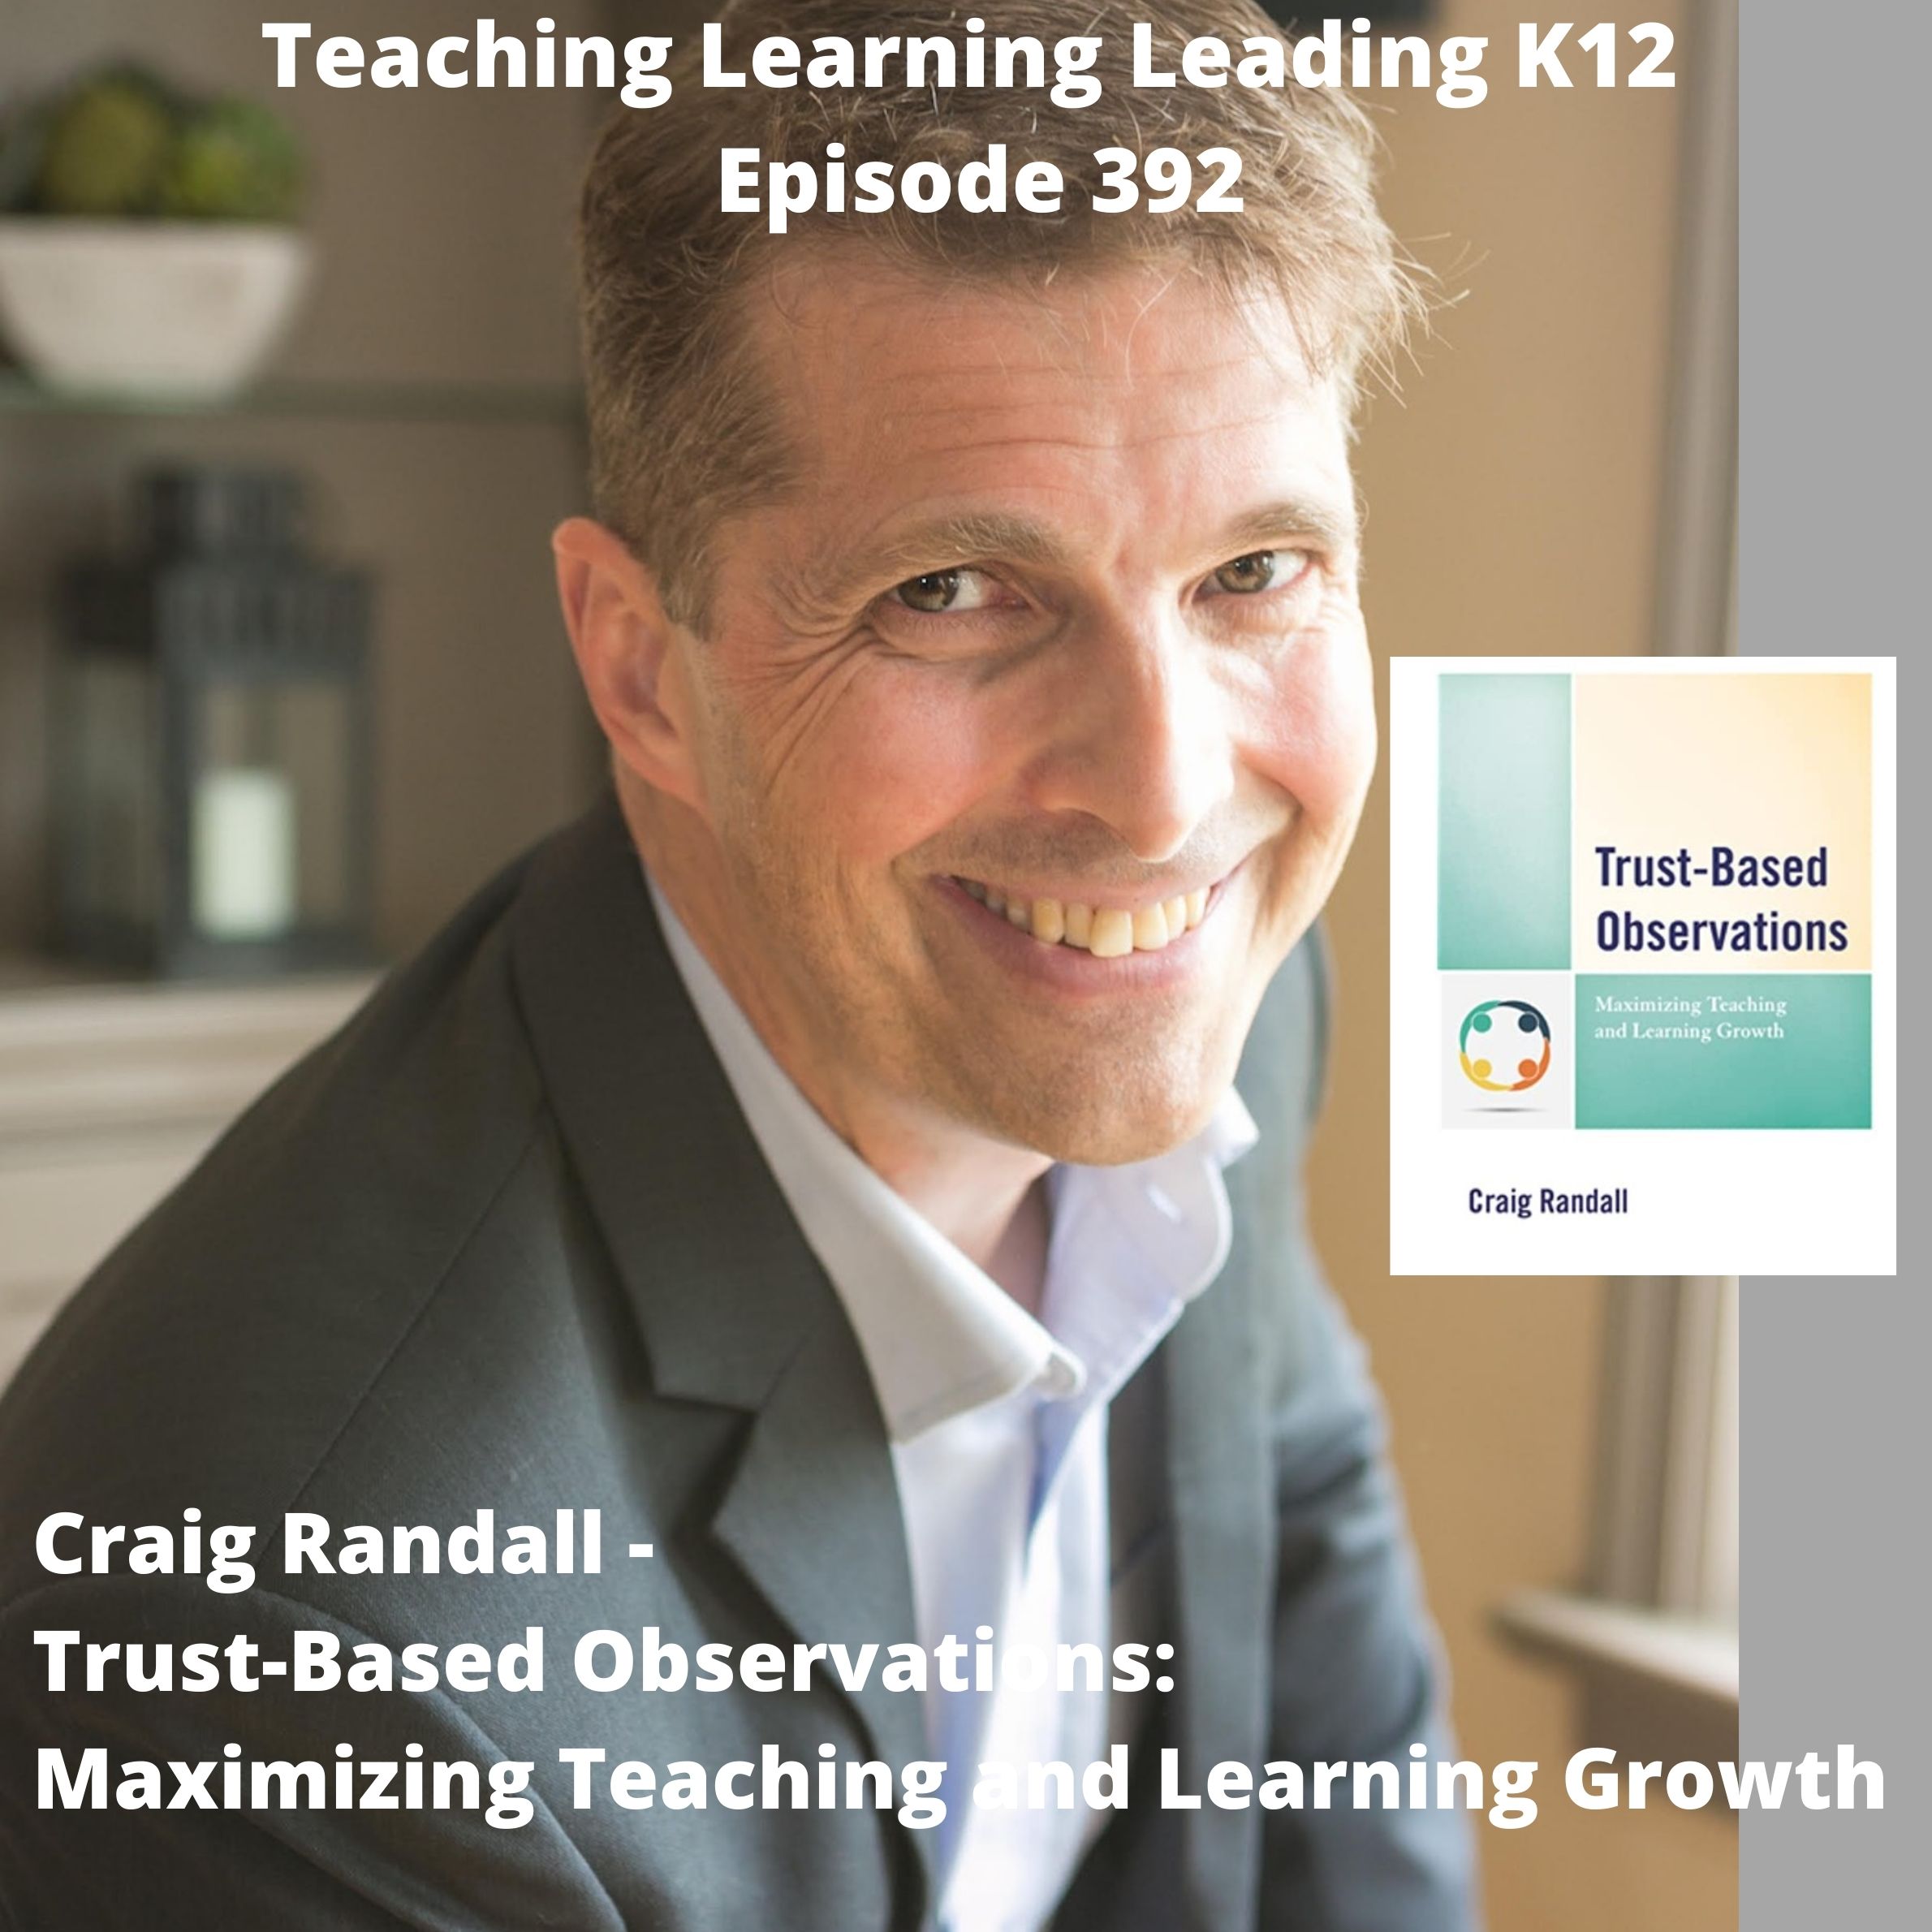 Craig Randall - Trust-Based Observations: Maximizing Teaching and Learning Growth - 392 Image